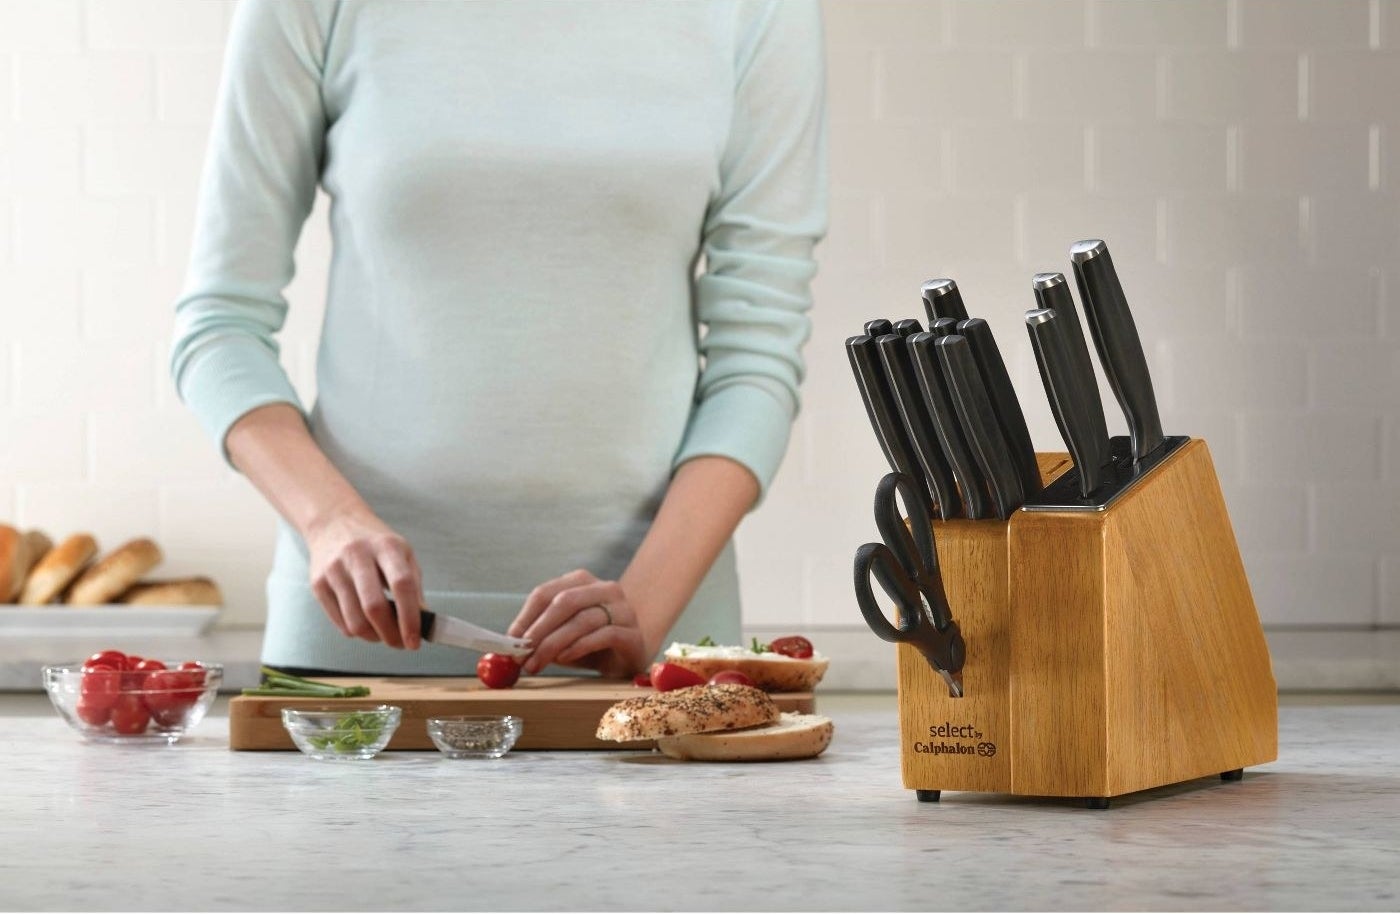 calphalon knife set in a wood block on a table next to a model cutting vegetables